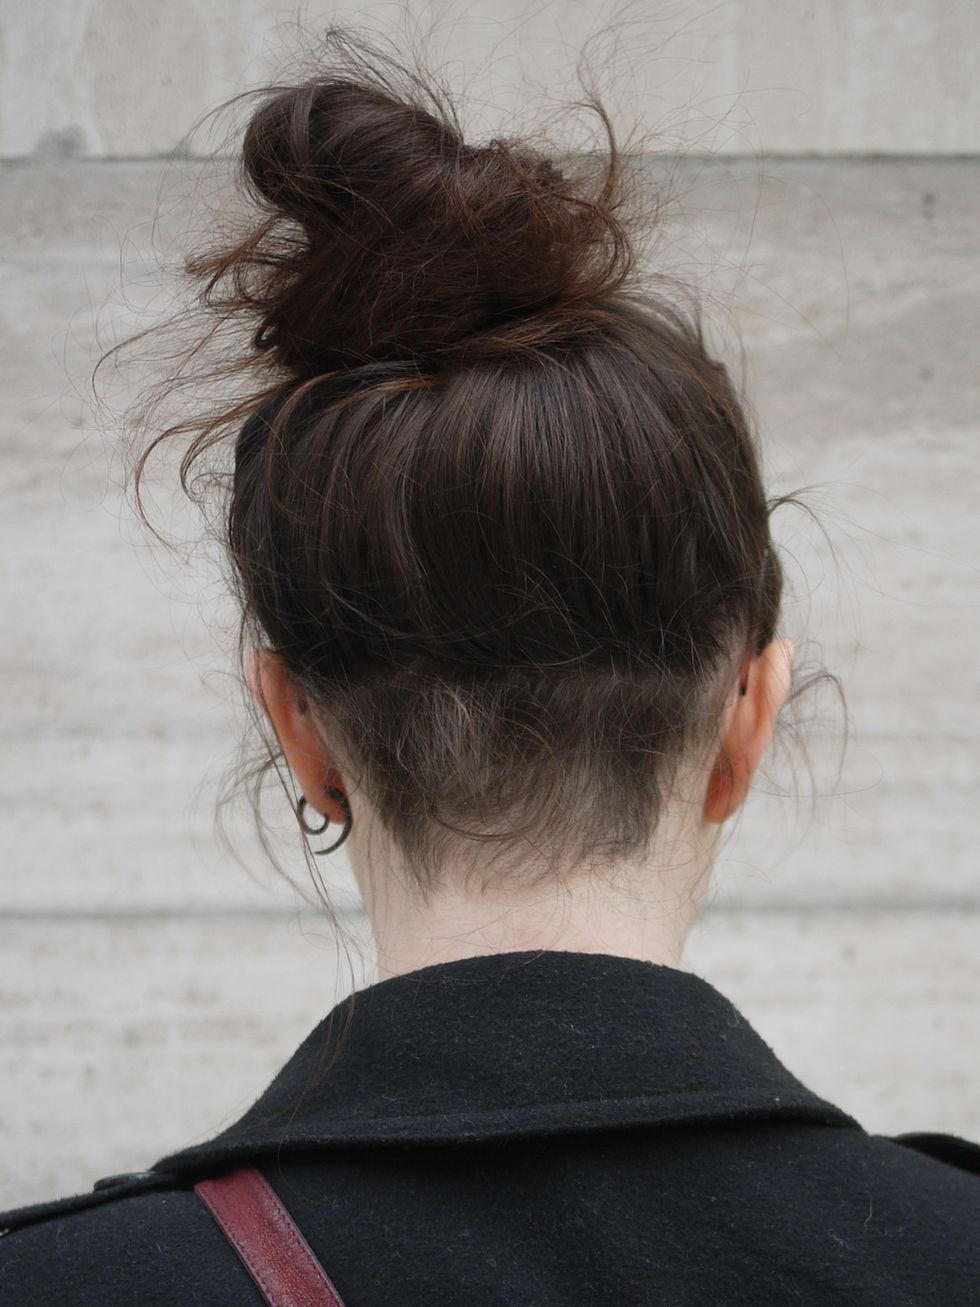 Ear, Hairstyle, Style, Neck, Earrings, Liver, Bun, Back, Chignon, Hair accessory, 